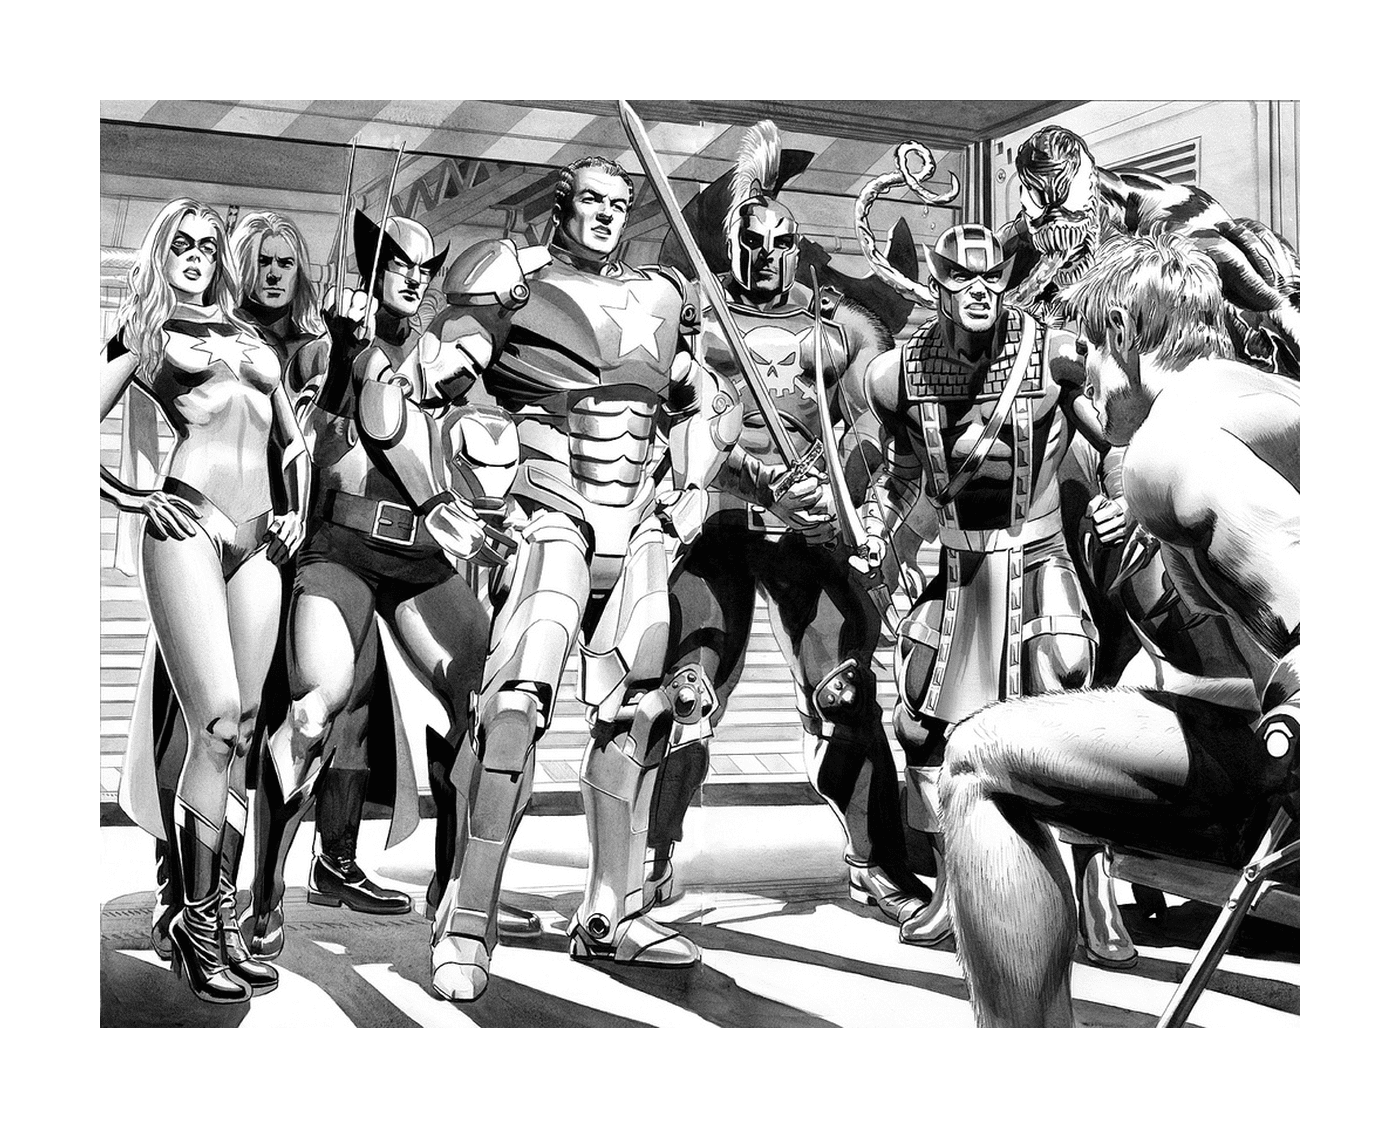  A black and white photograph of a group of superheroes 